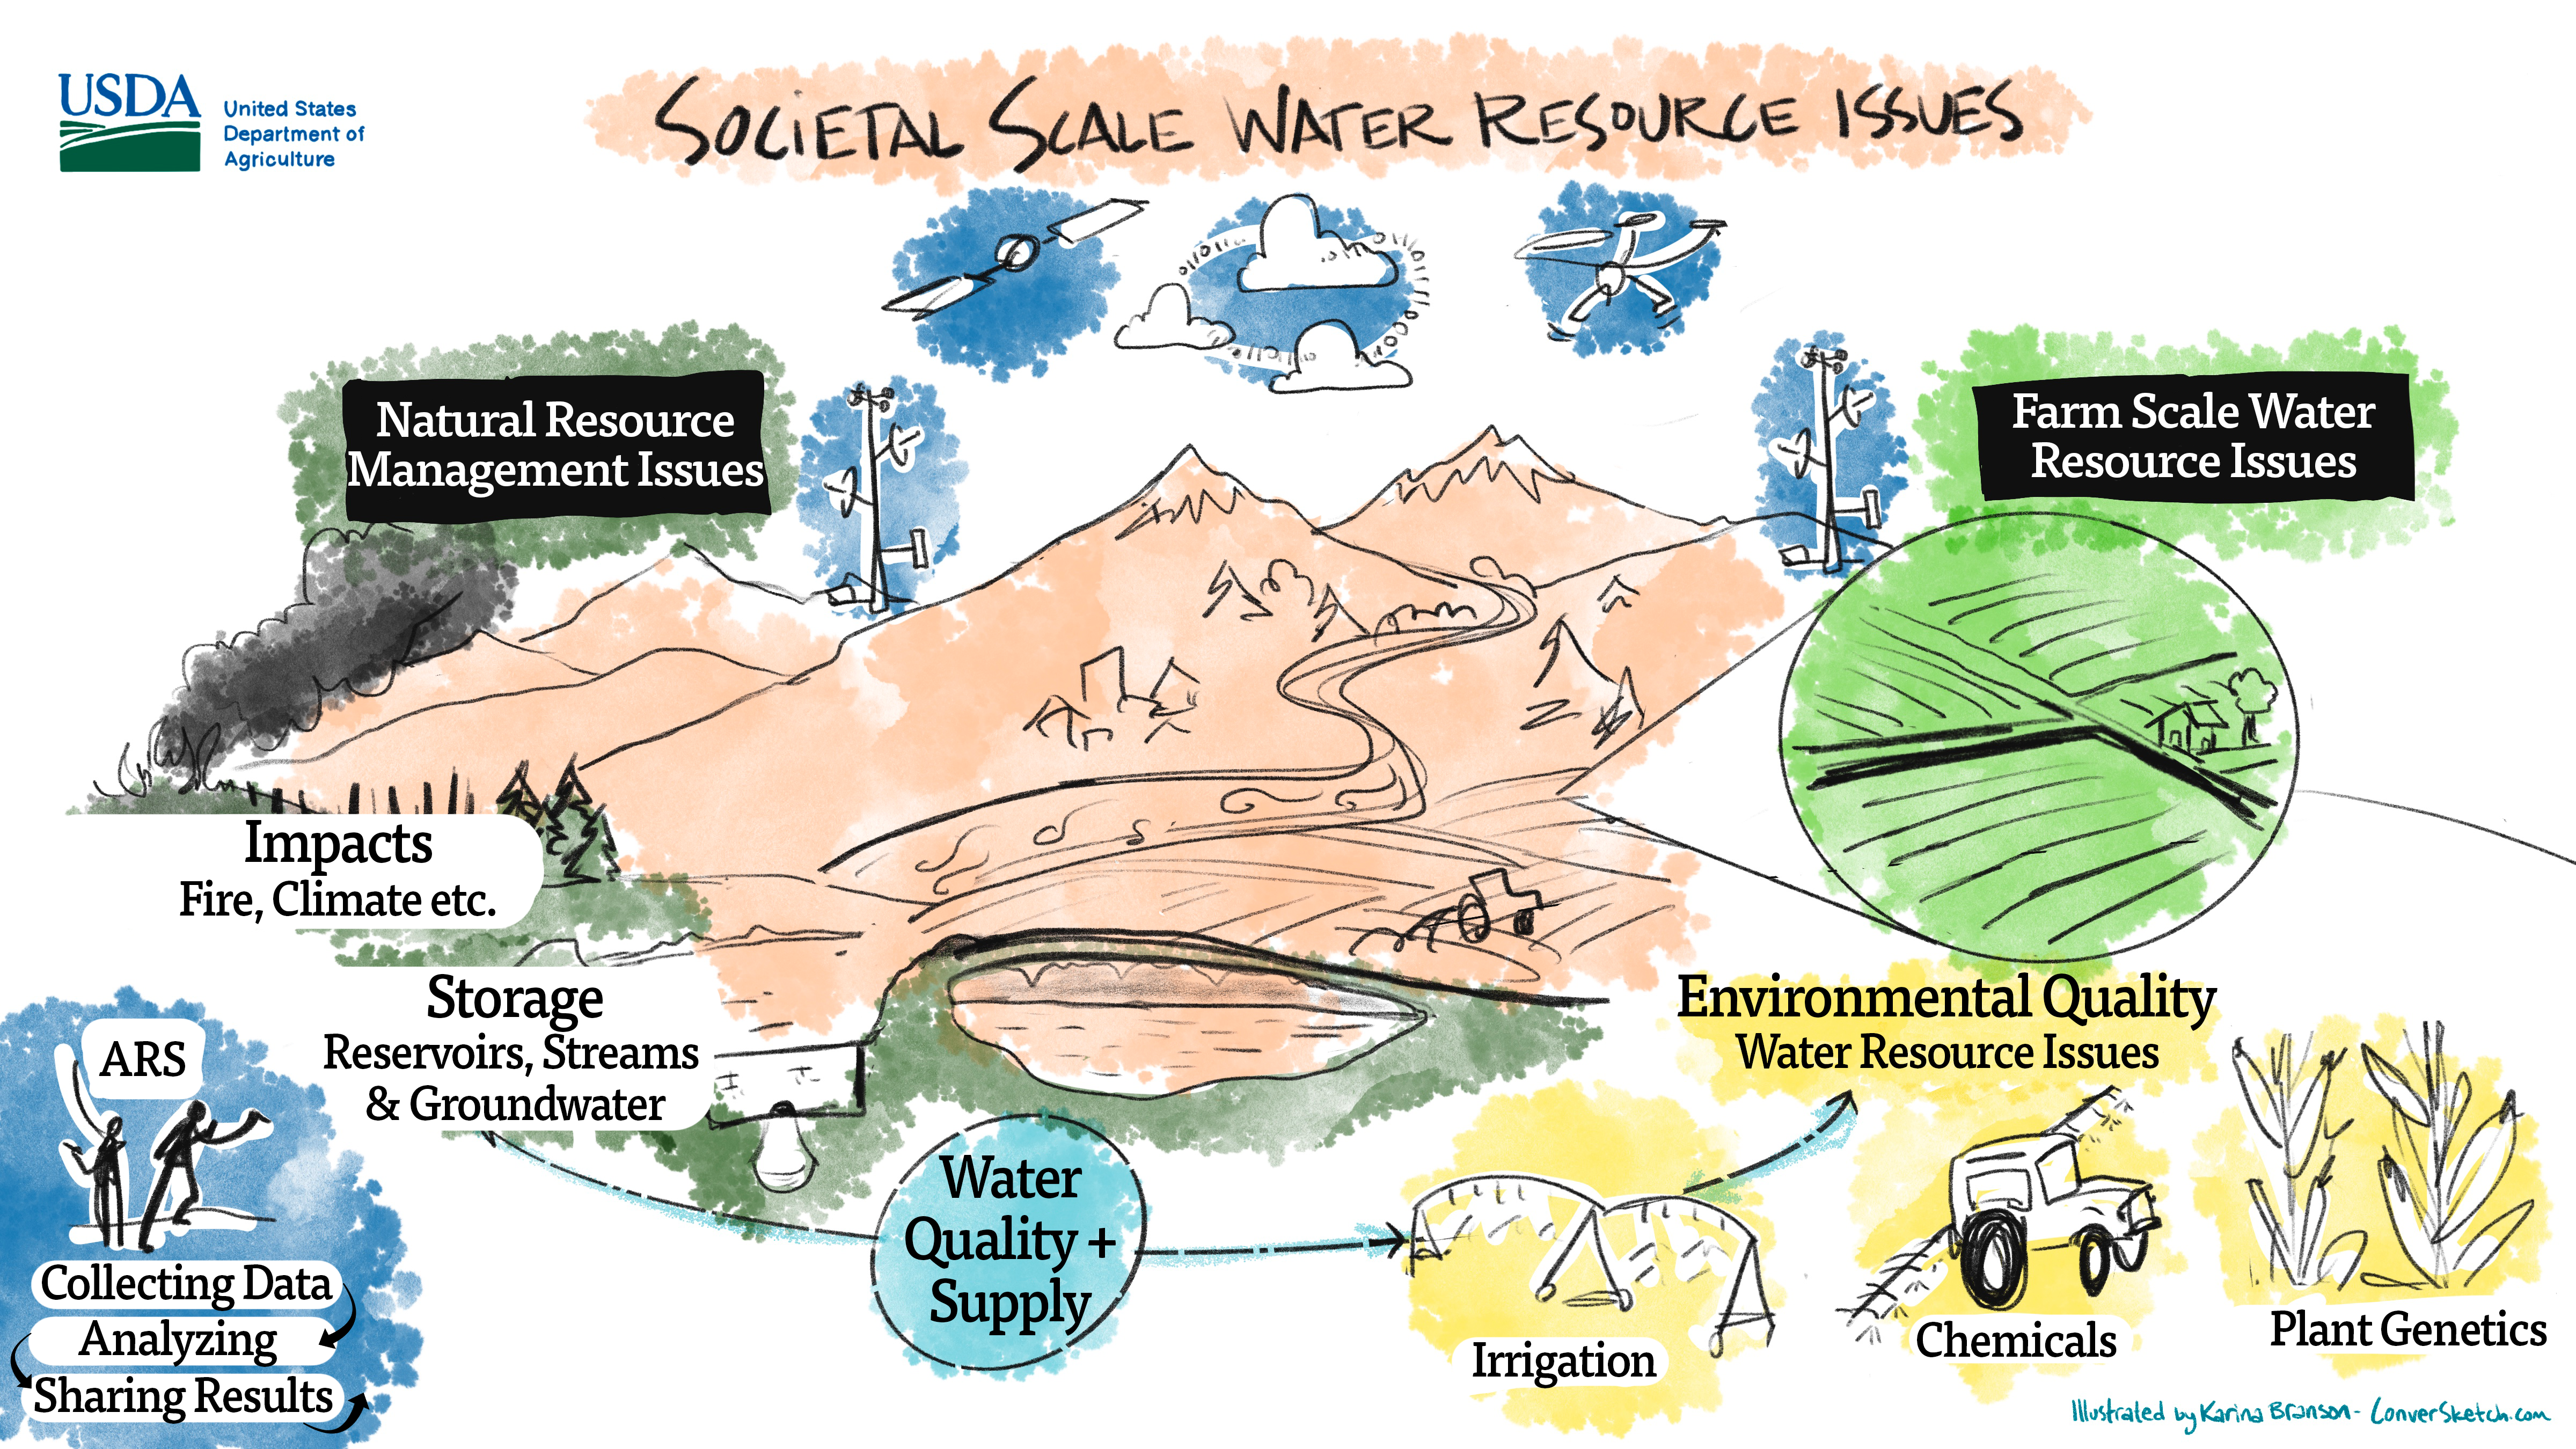 Societal Scale Water Resource Issues